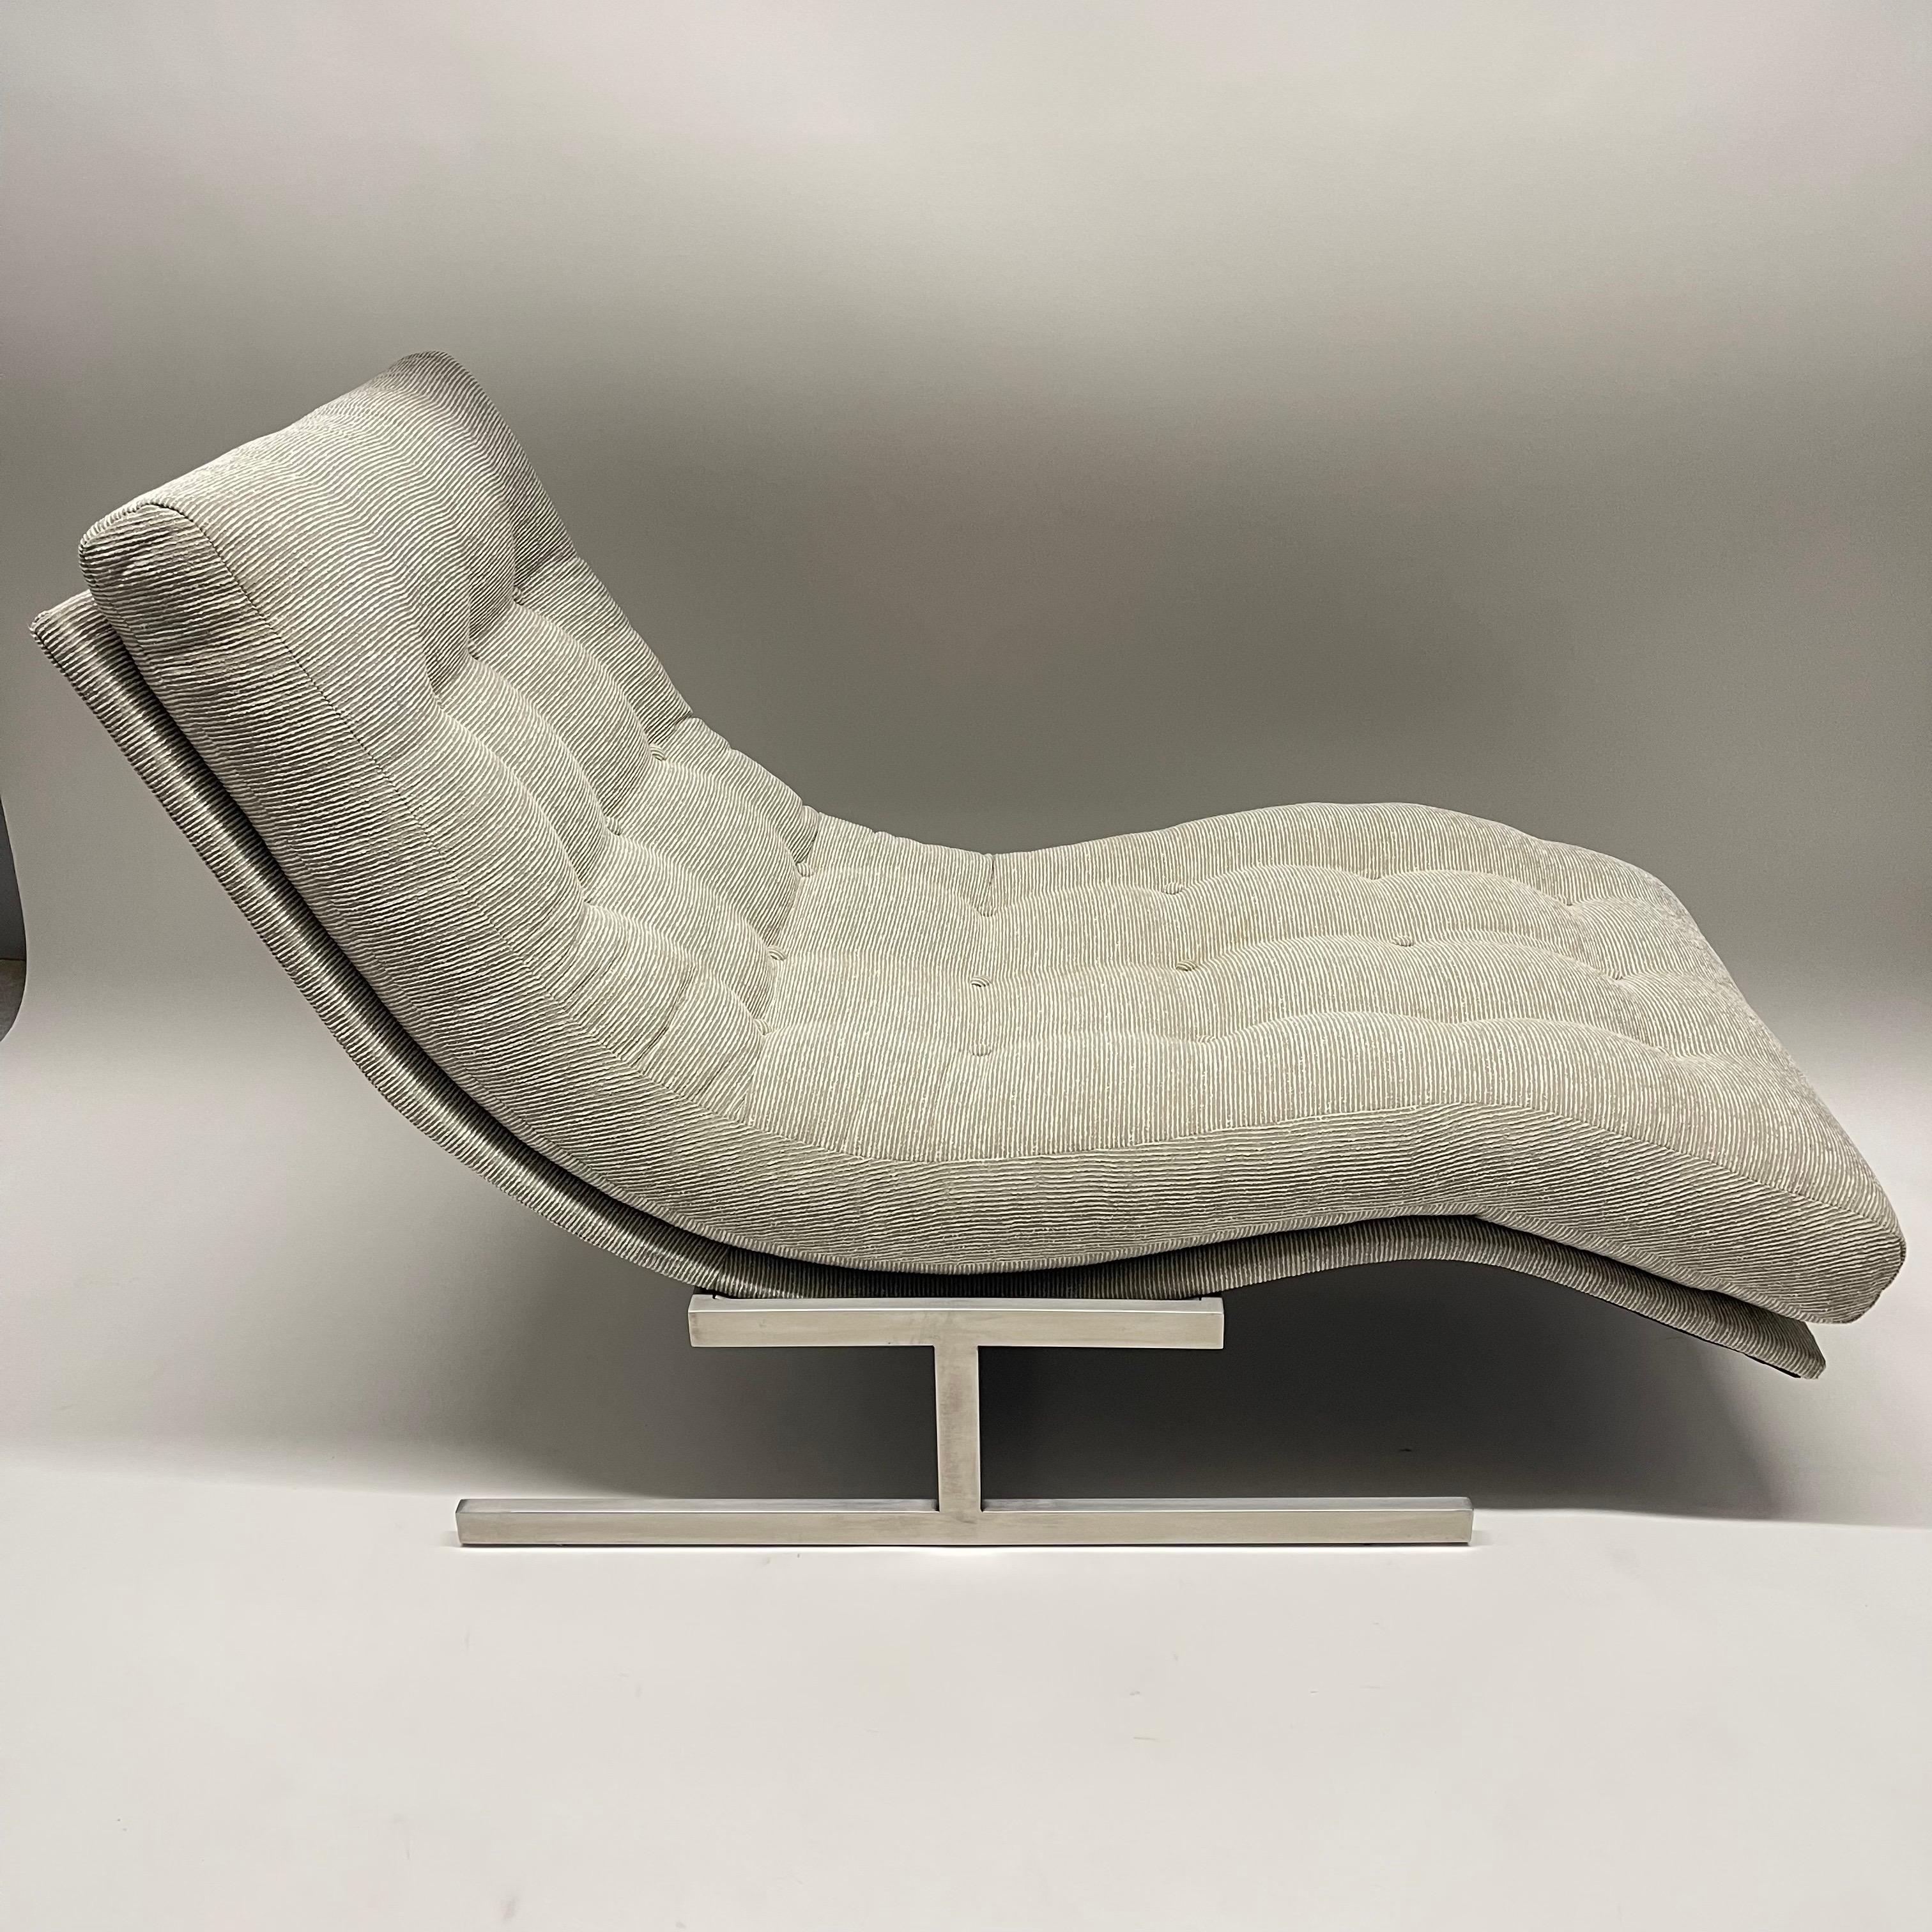 Stainless Steel Mid Century Wave Chaise in the Style of Milo Baughman, circa 1970's For Sale